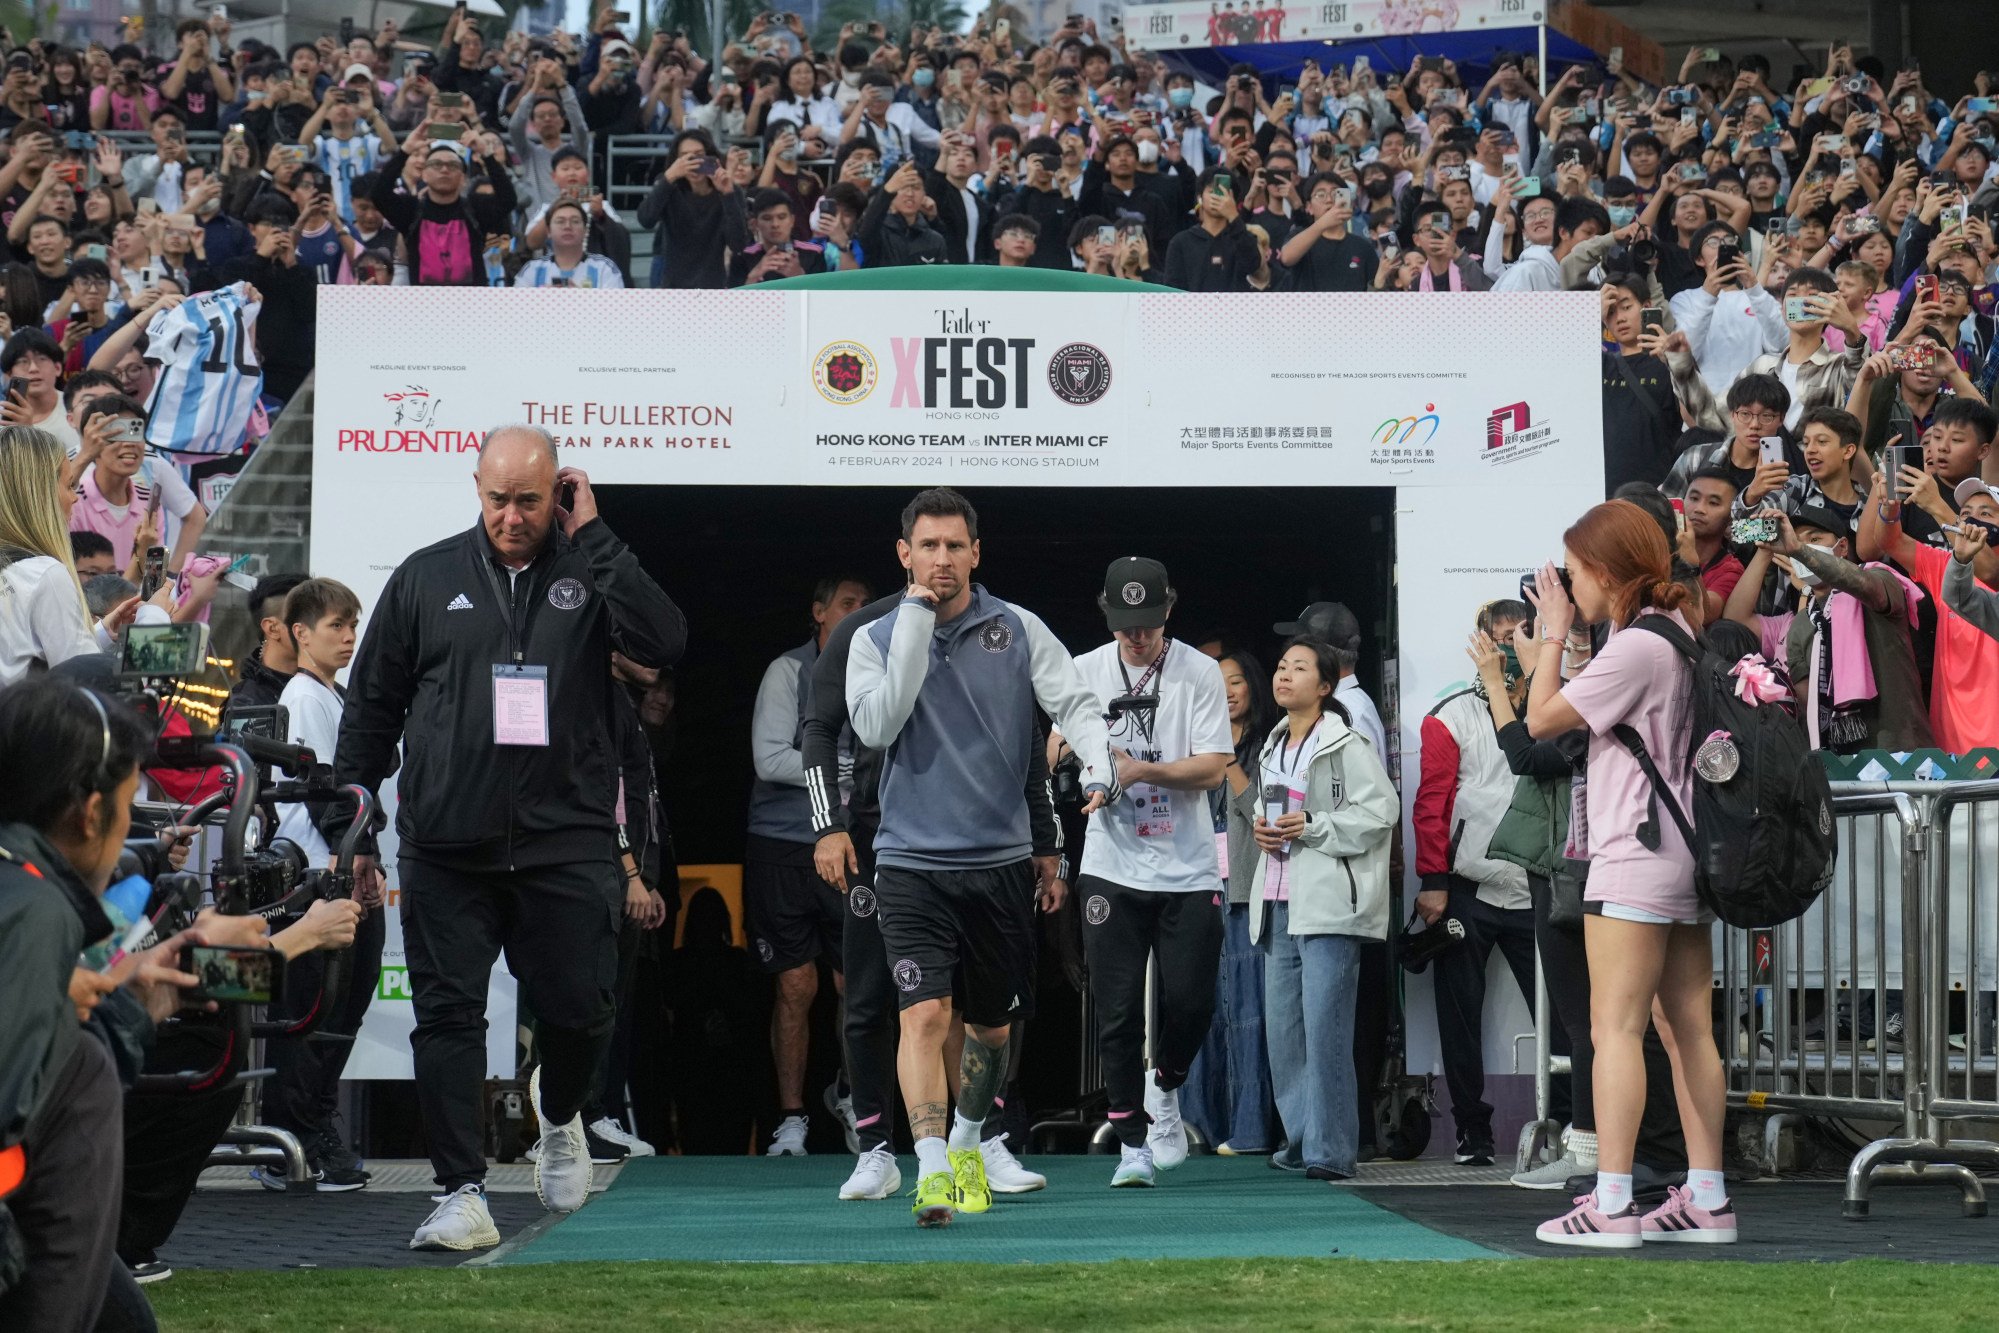 Football superstar Lionel Messi's visit to Hong Kong draws fans from across  region | South China Morning Post